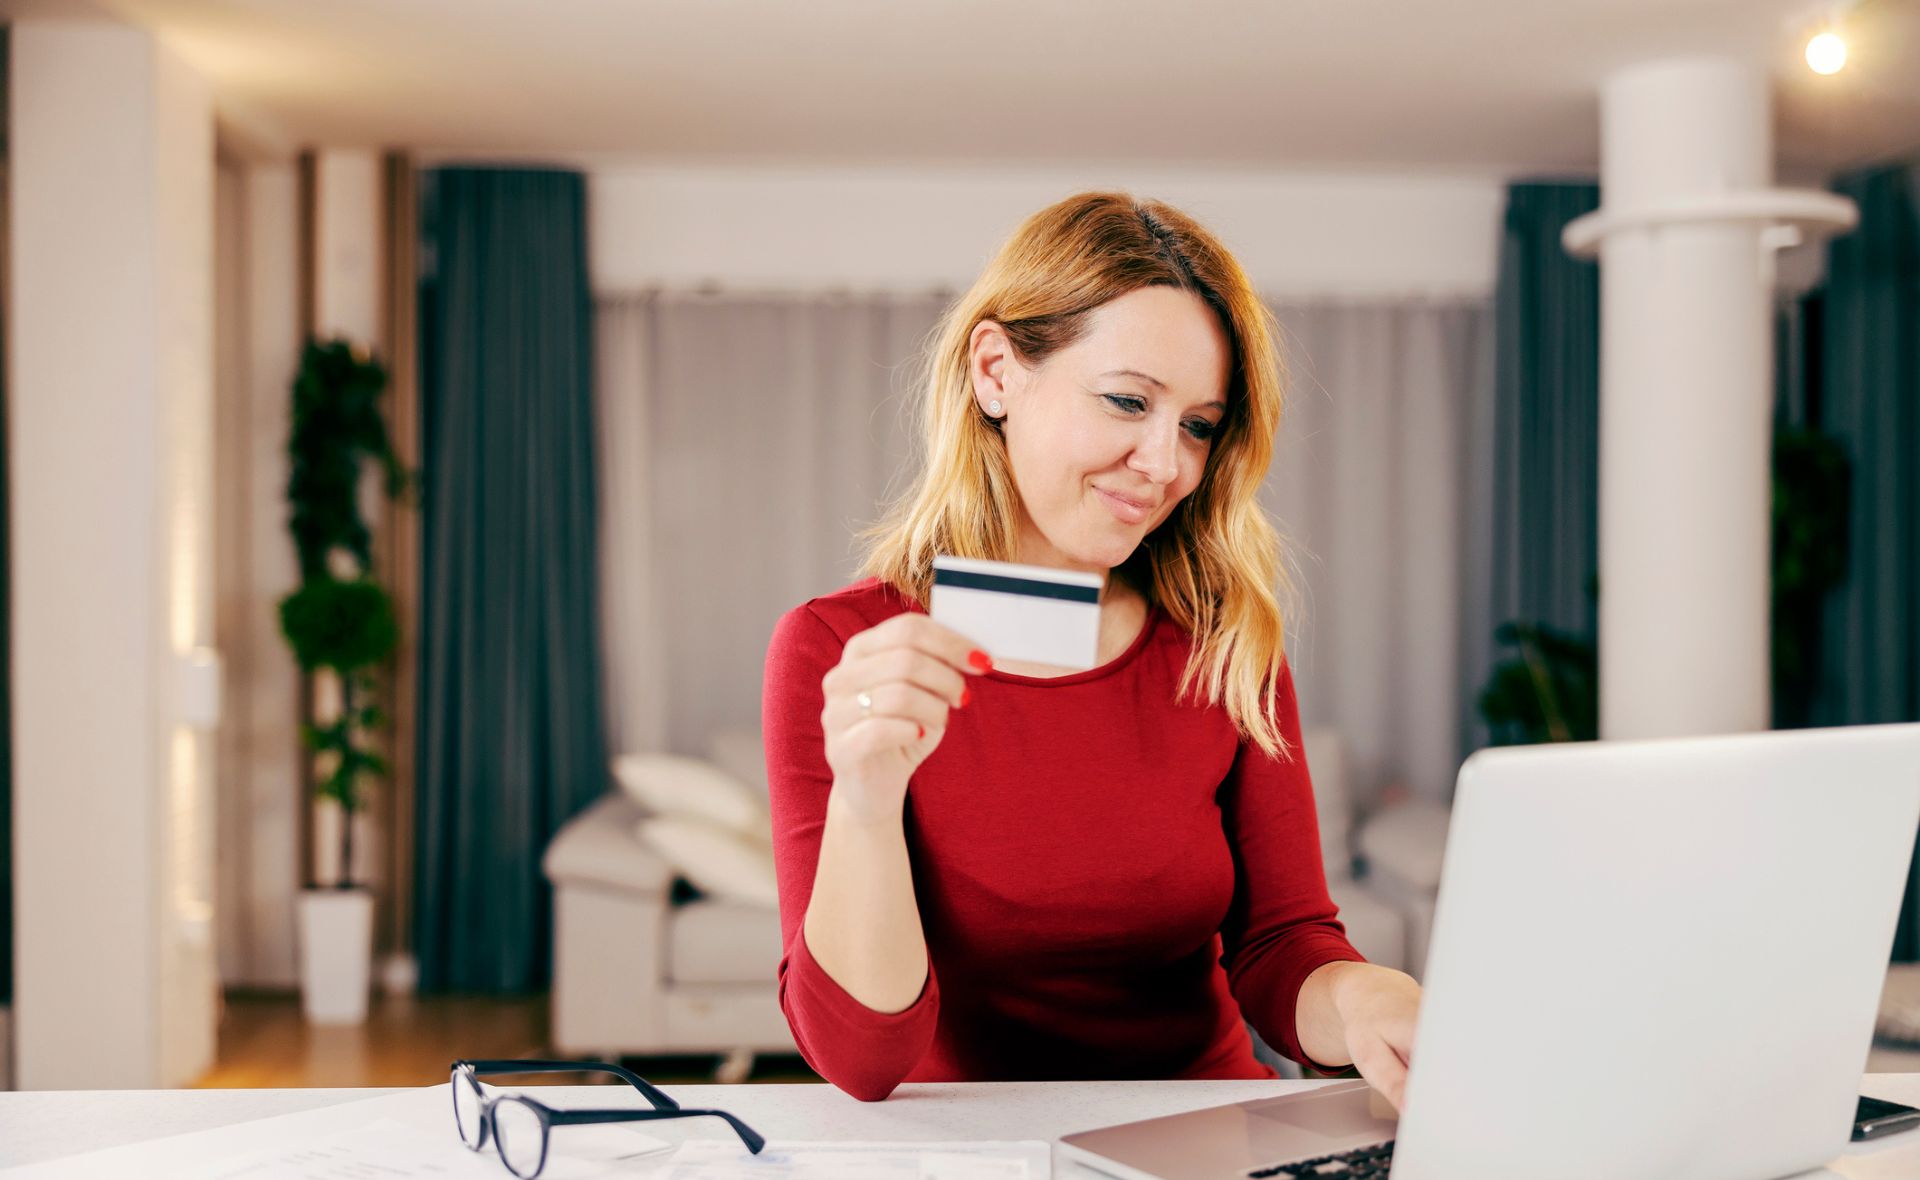 The real reason you need a credit score, according to experts